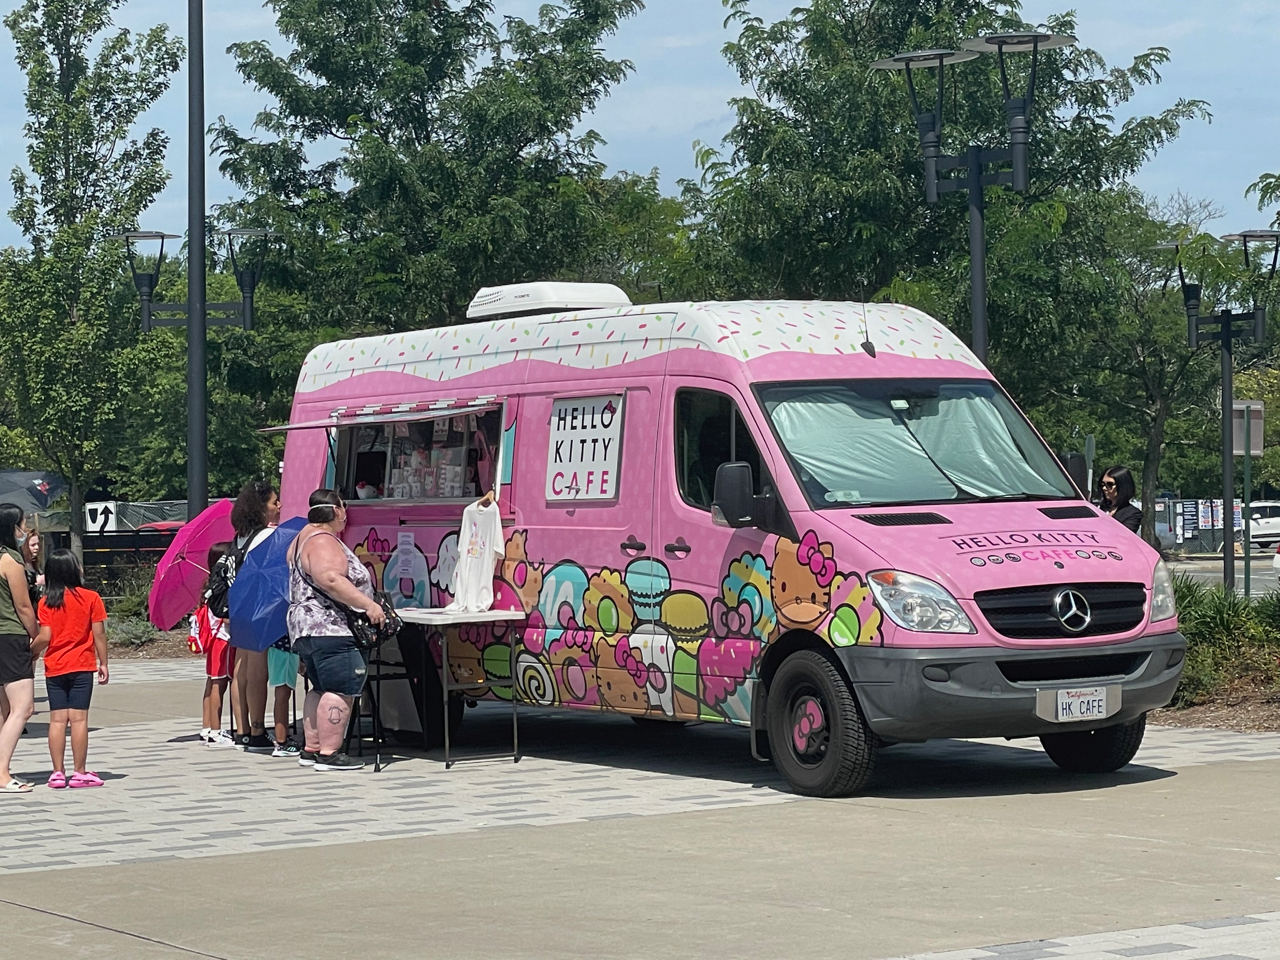 Here's Where You Will Find The Hello Kitty Cafe Food Truck in Las